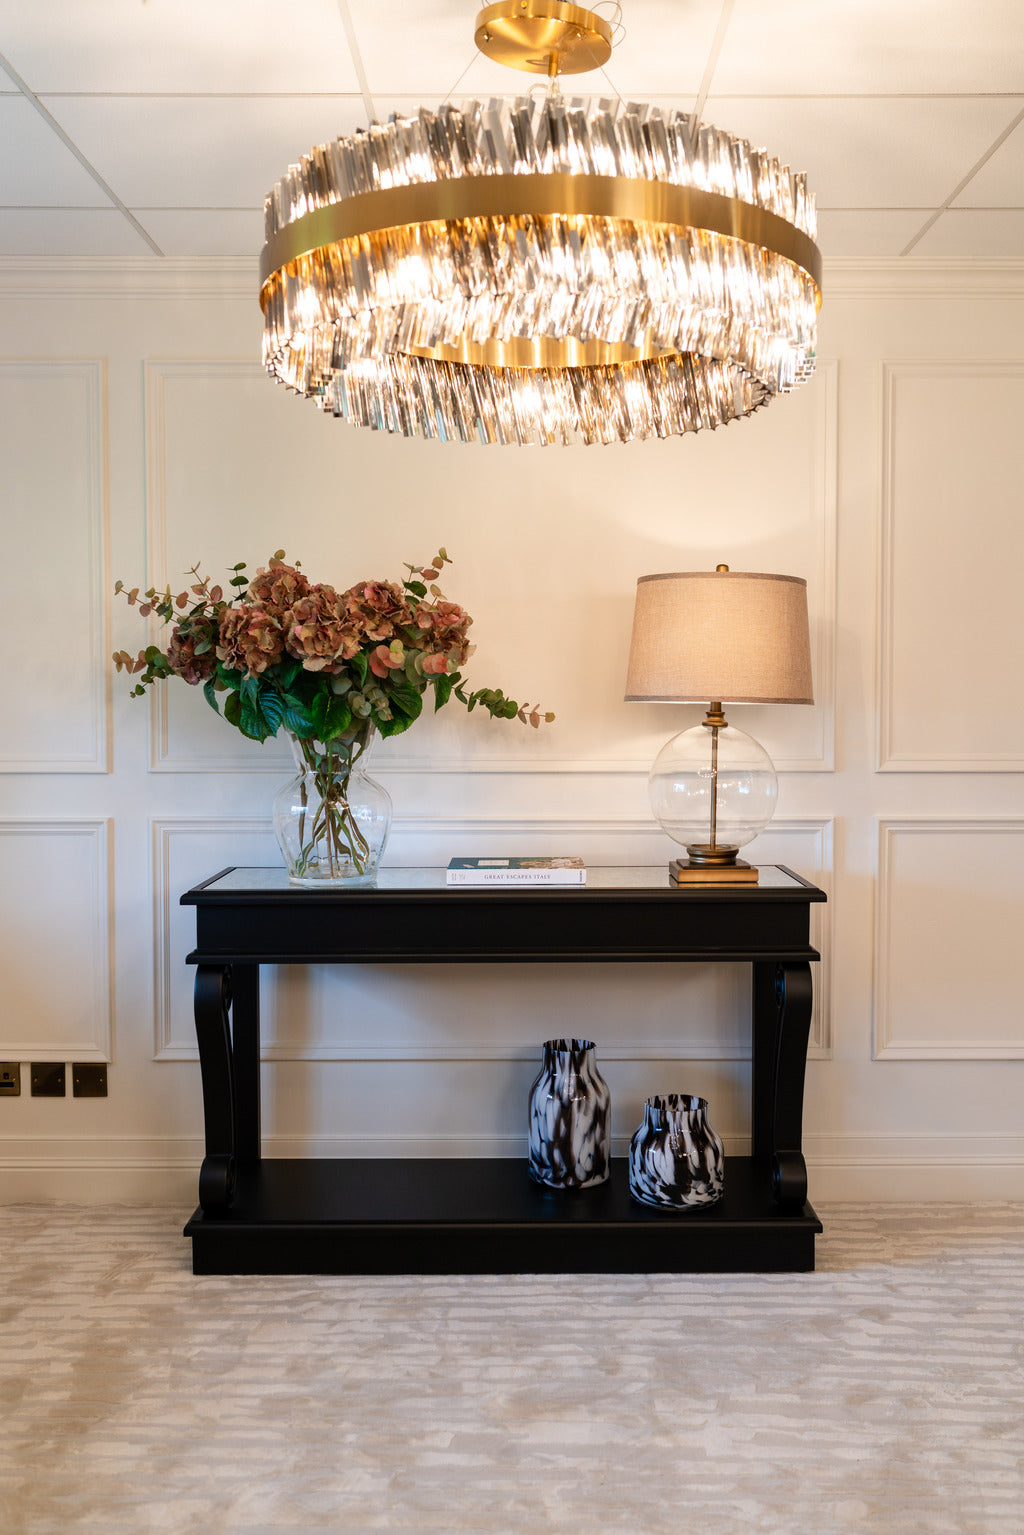 Console table, black console table, large console table, black furniture, indoor furniture, Table, Home decor, lighting, lamps, Statement lamps, gold lamps, gold